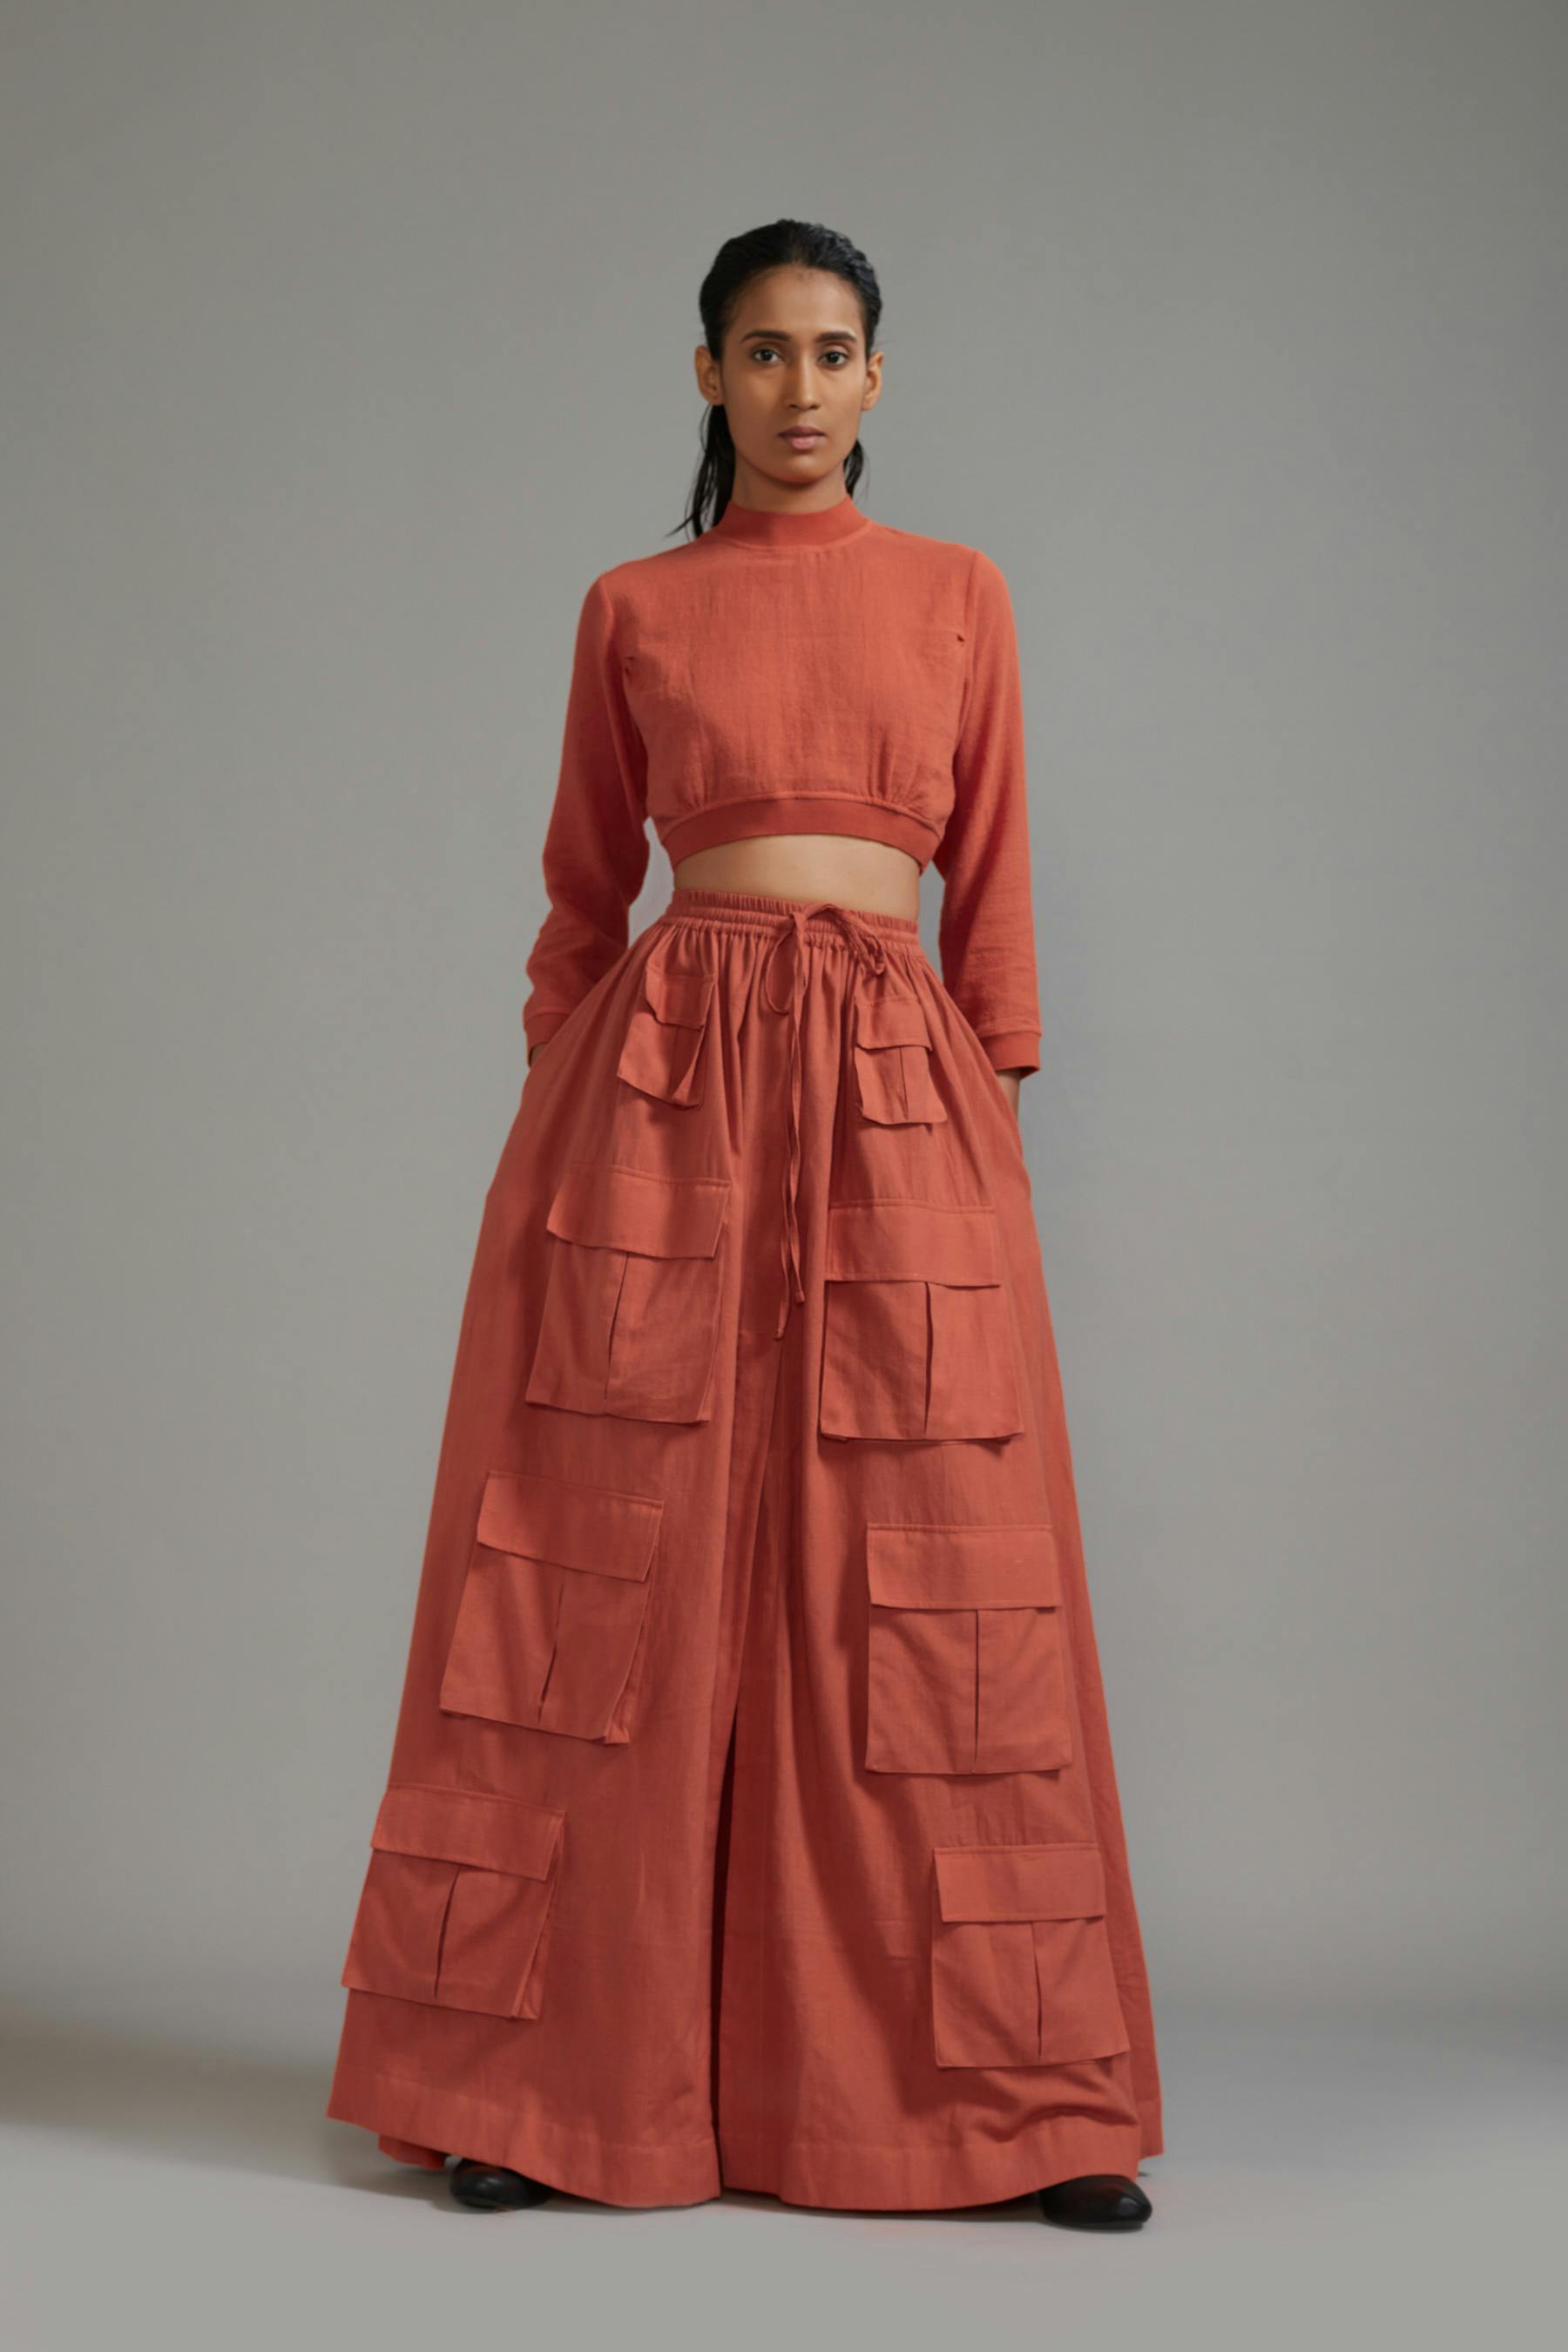 Rust Crop Top and Cargo Skirt Set, a product by Style Mati